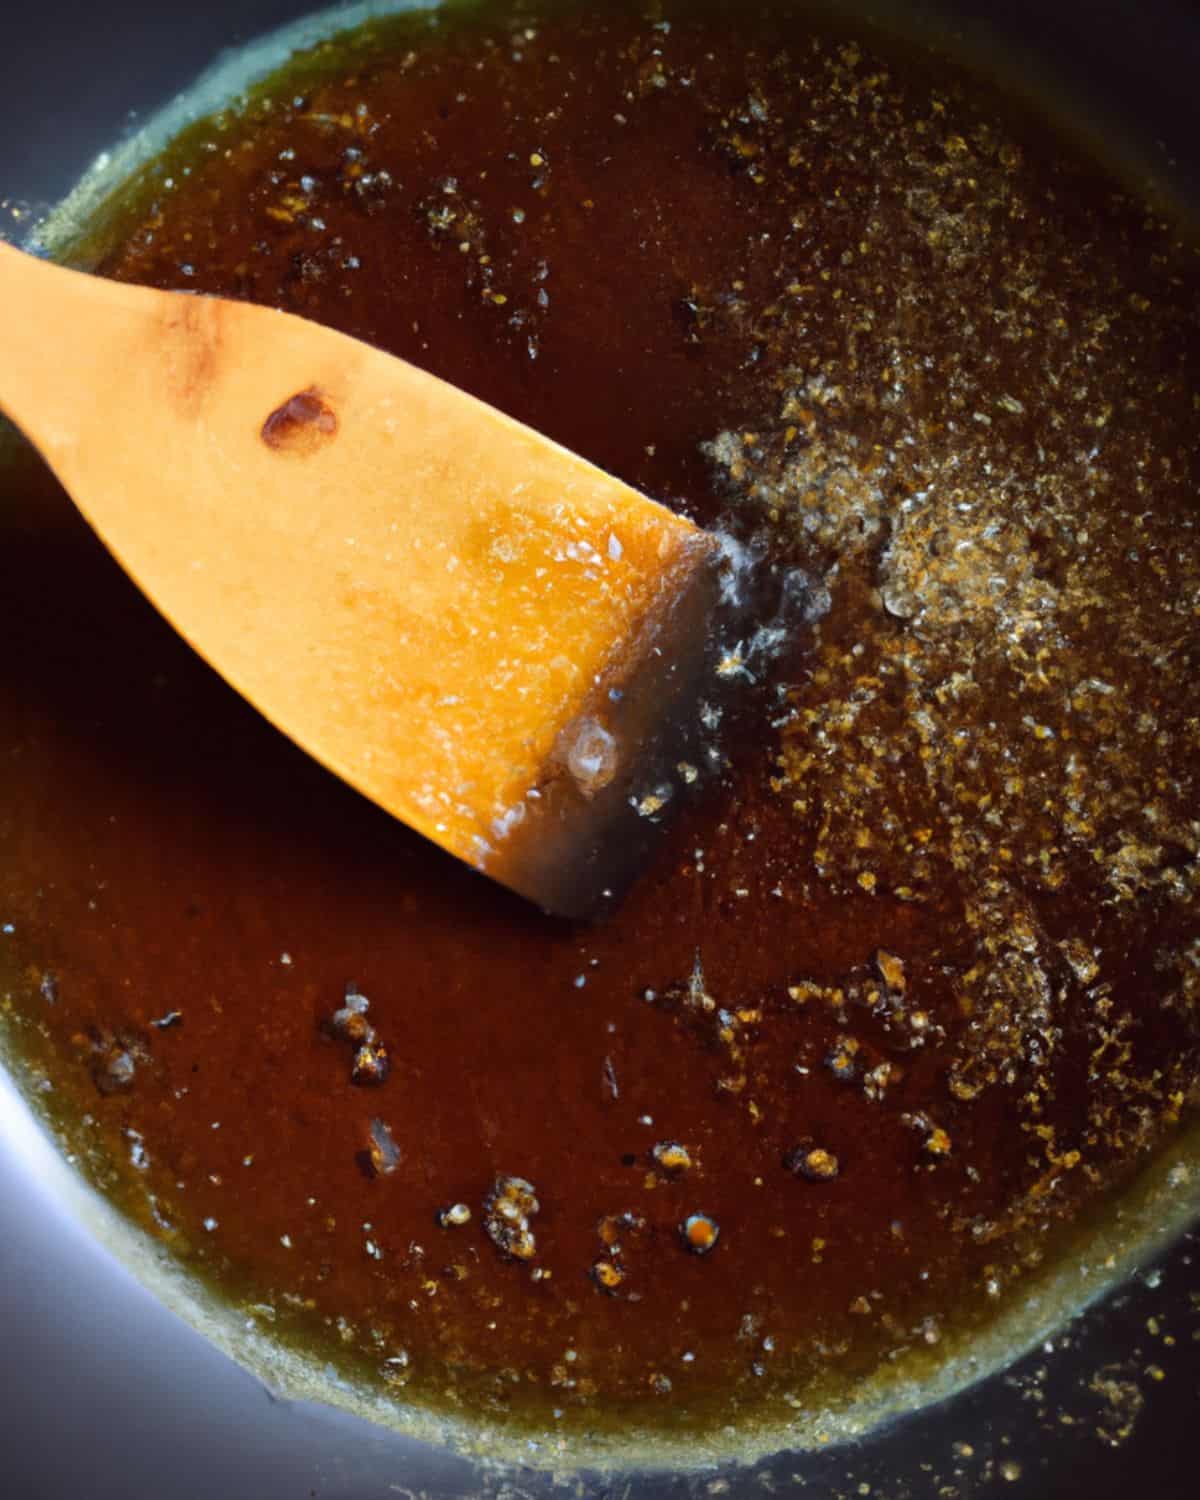 Wooden spoon in a pan with soy sauce and some melted brown sugar.